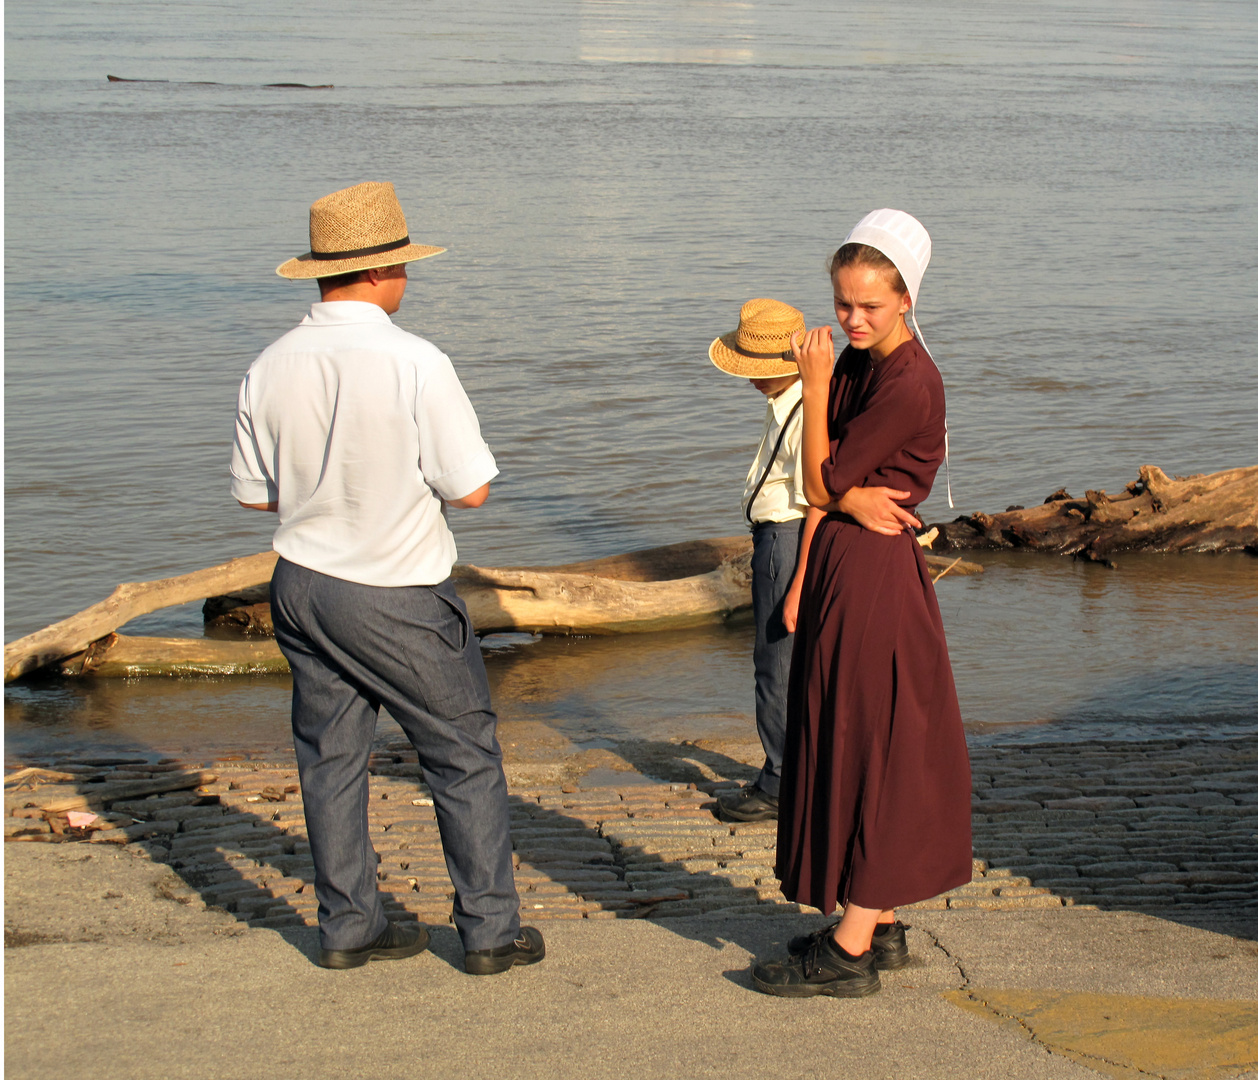 Amish along the Mississippi river